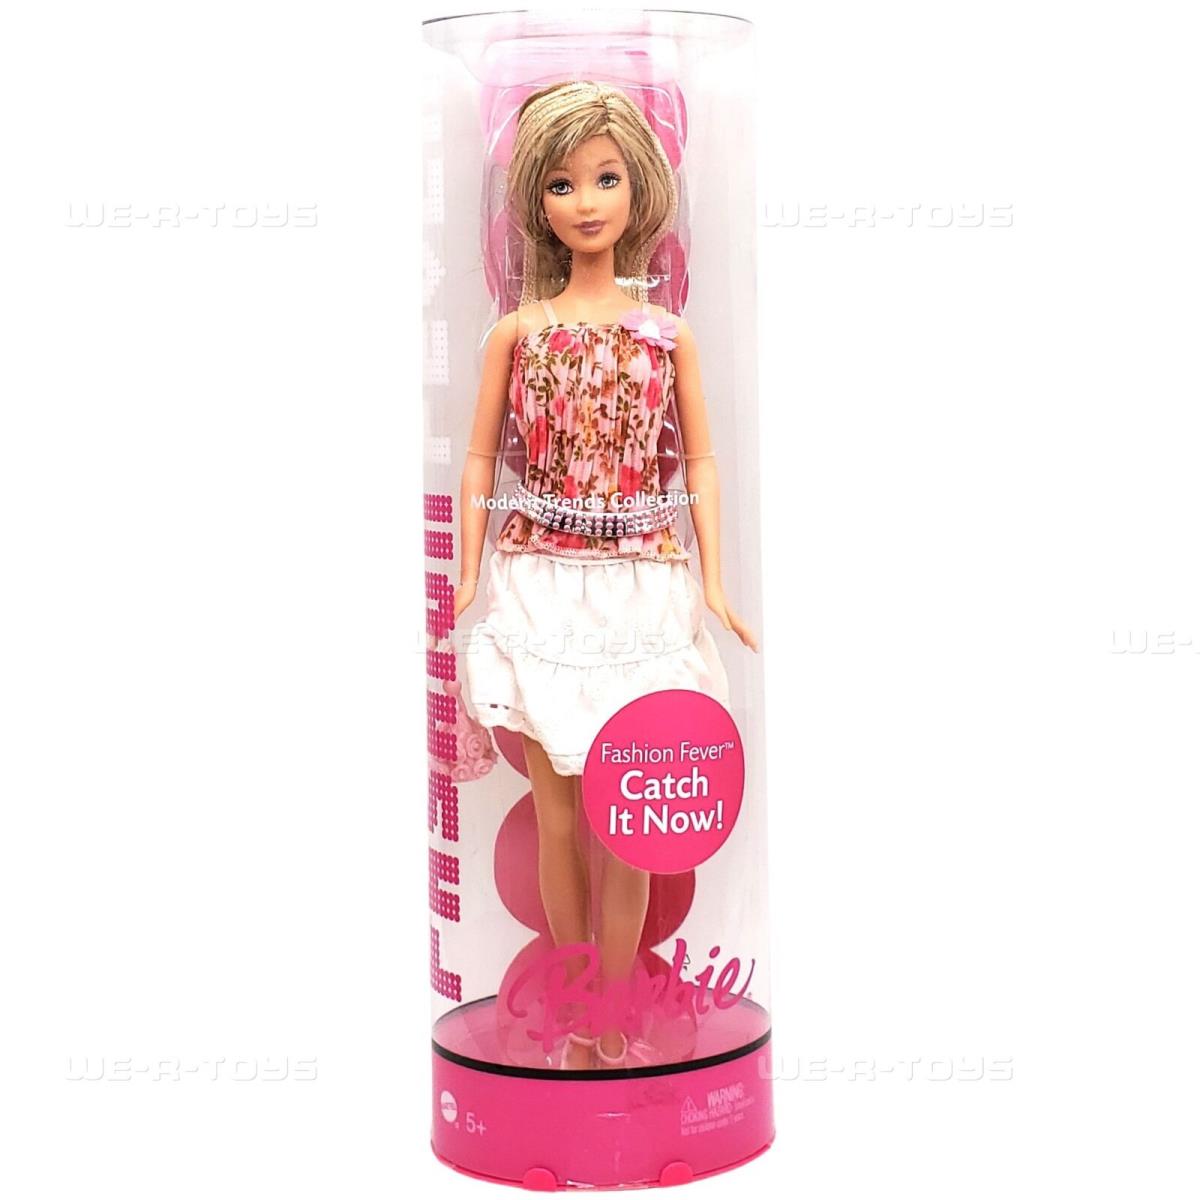 Barbie Fashion Fever Modern Trends Doll in Floral Pink Top White Skirt K9810